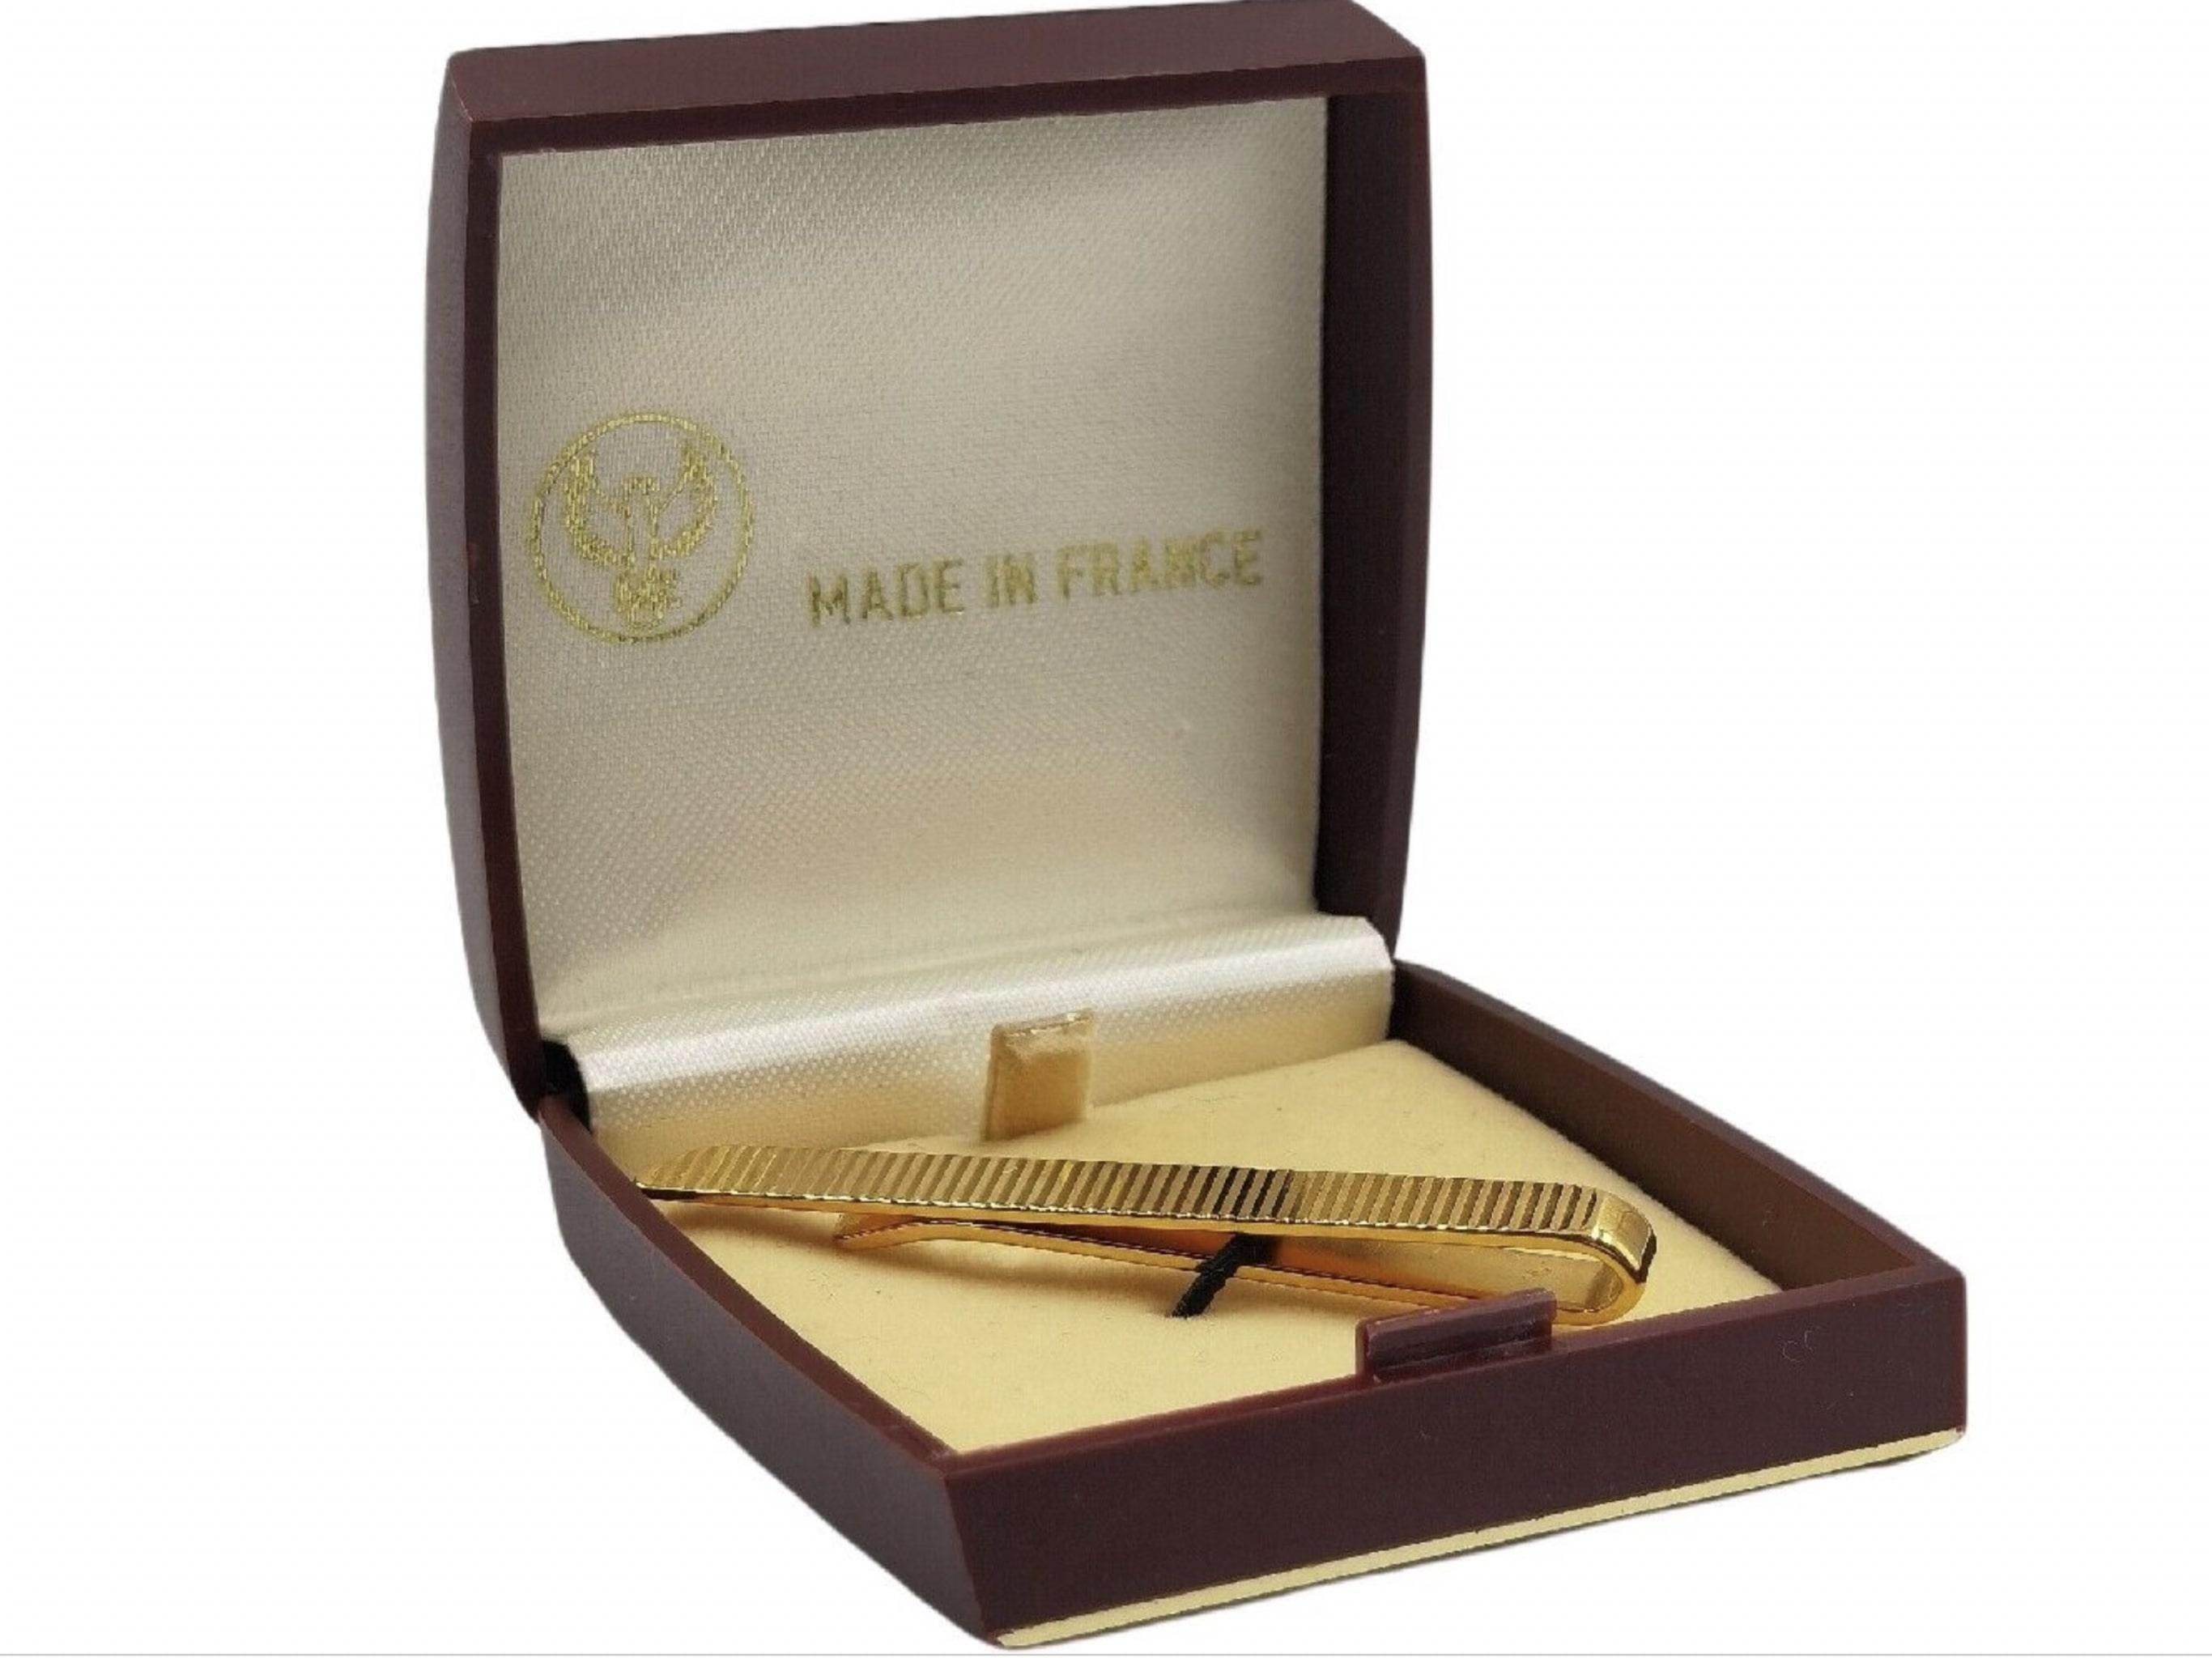 Vintage tie clip 
Gold plates 
Made in France 
Dates back to the 1950s
It is still in its original box 
Looks like the tie clip and the box have not been used 
Art Deco 
Perfect for a gift 